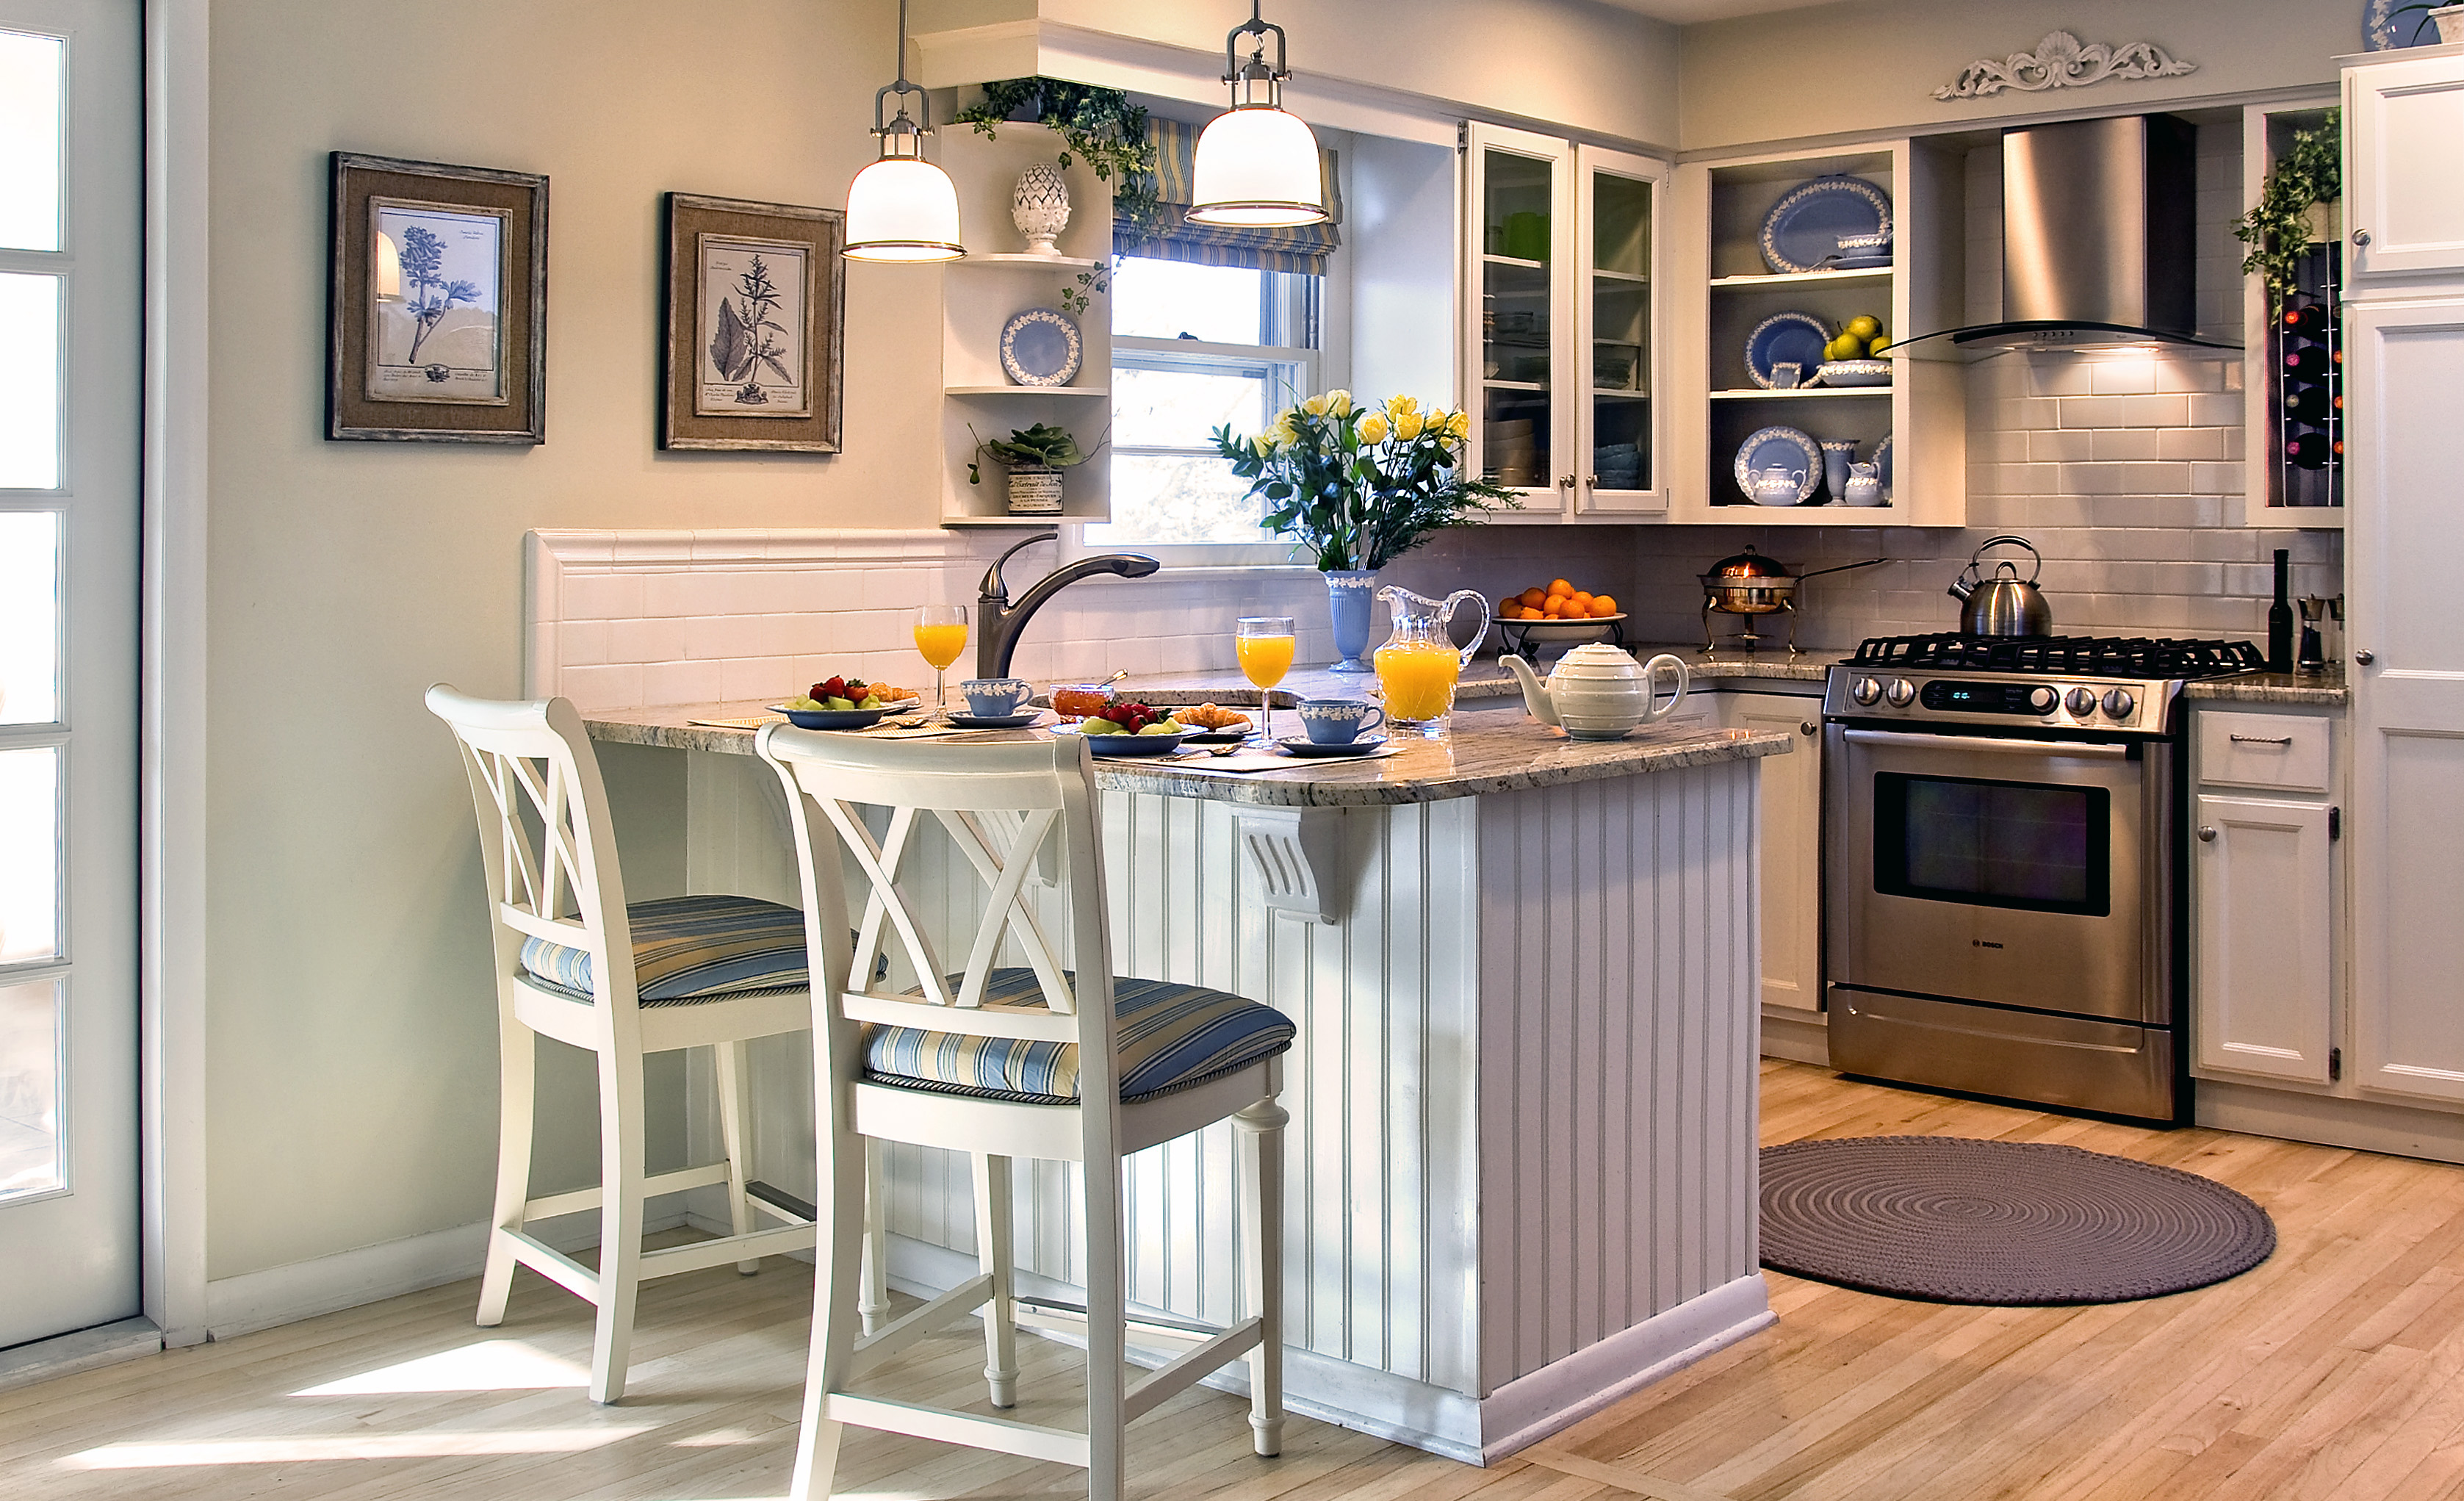 Maximizing Space In A Small Kitchen: 7 Easy Steps